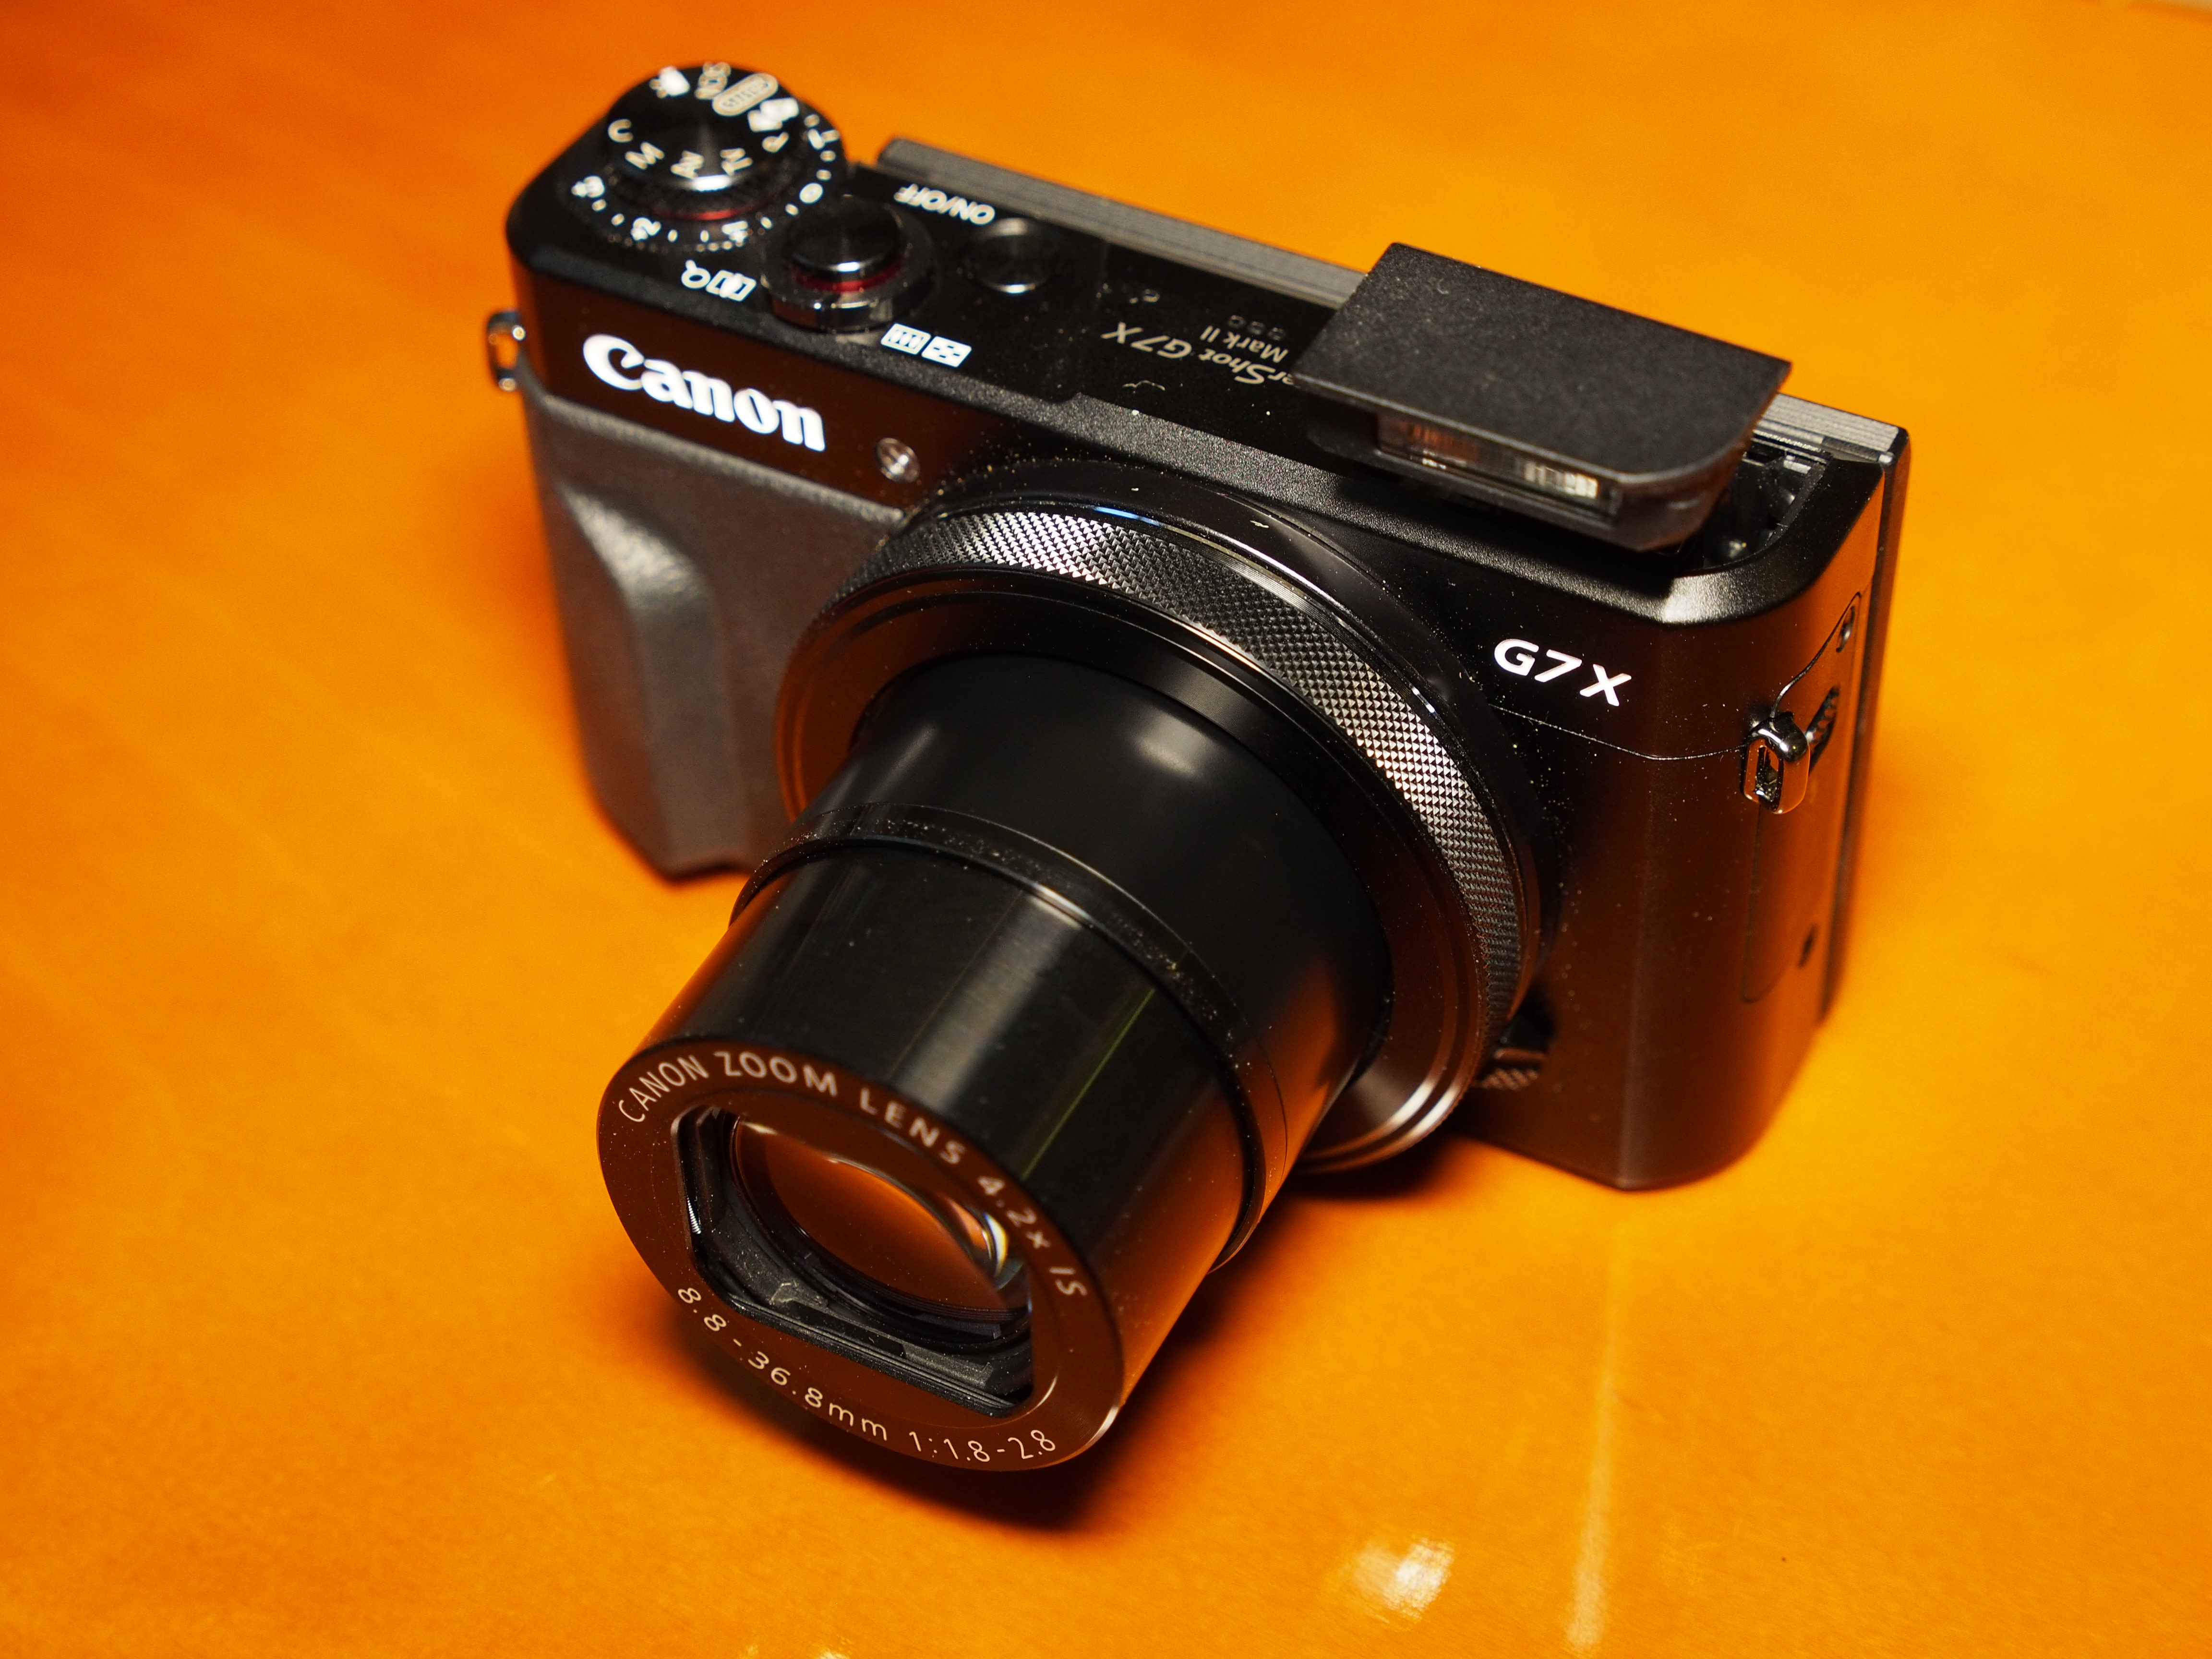 the Canon PowerShot G7 X Mark II Unleash Your Photography Potential